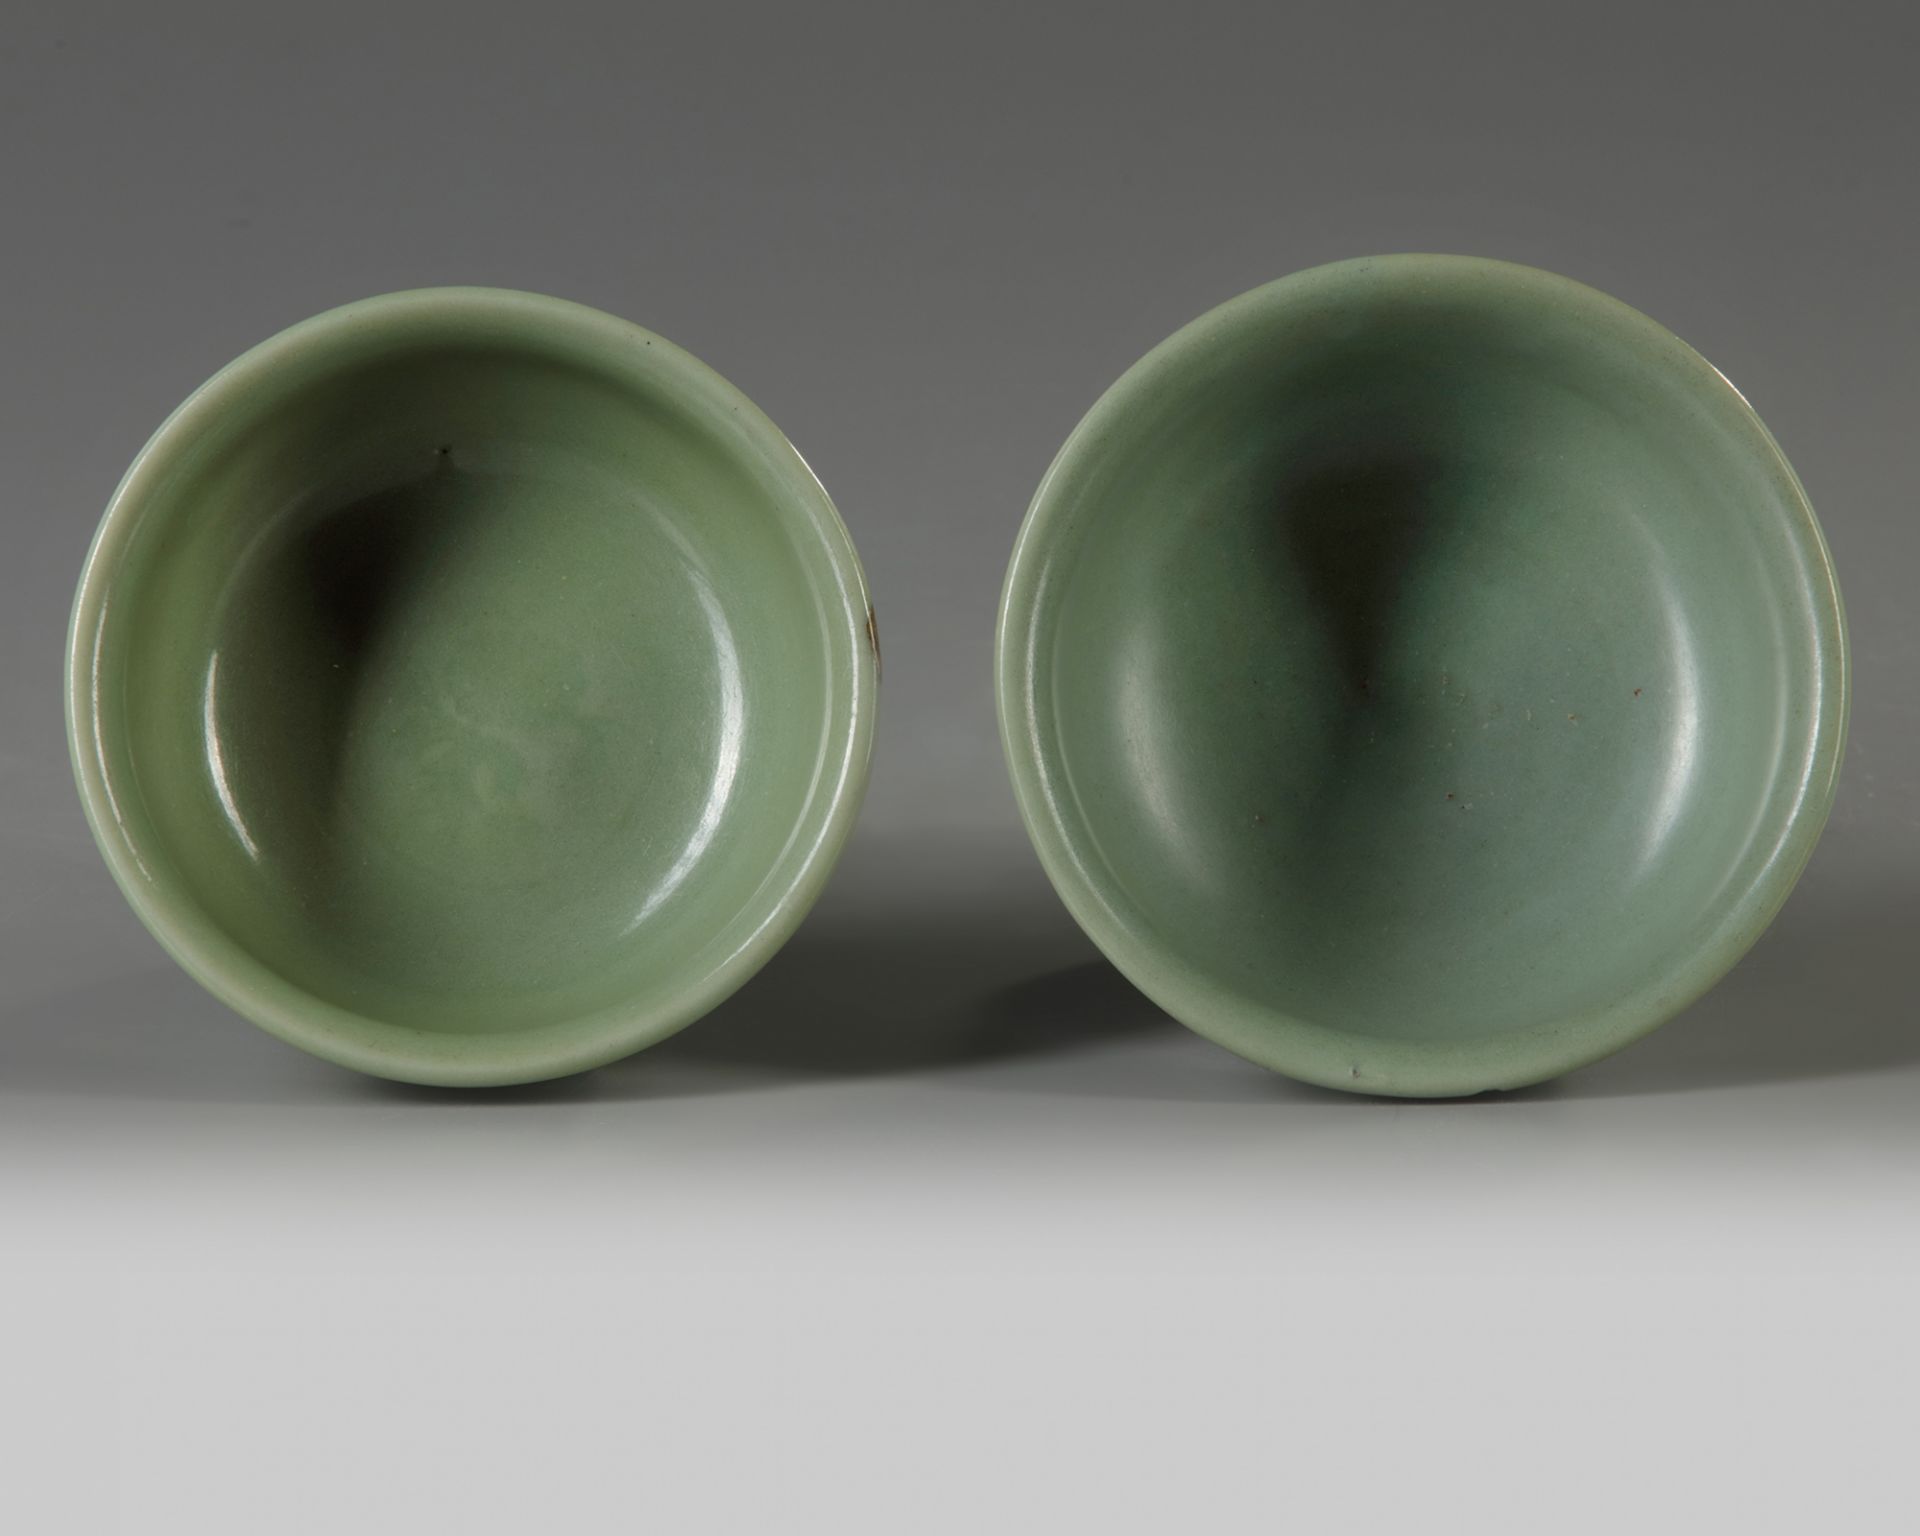 A SIMILAR PAIR OF CHINESE CELADON GLAZED STEMCUPS, LATE YUAN, EARLY MING DYNASTY, 14TH CENTURY - Bild 5 aus 5